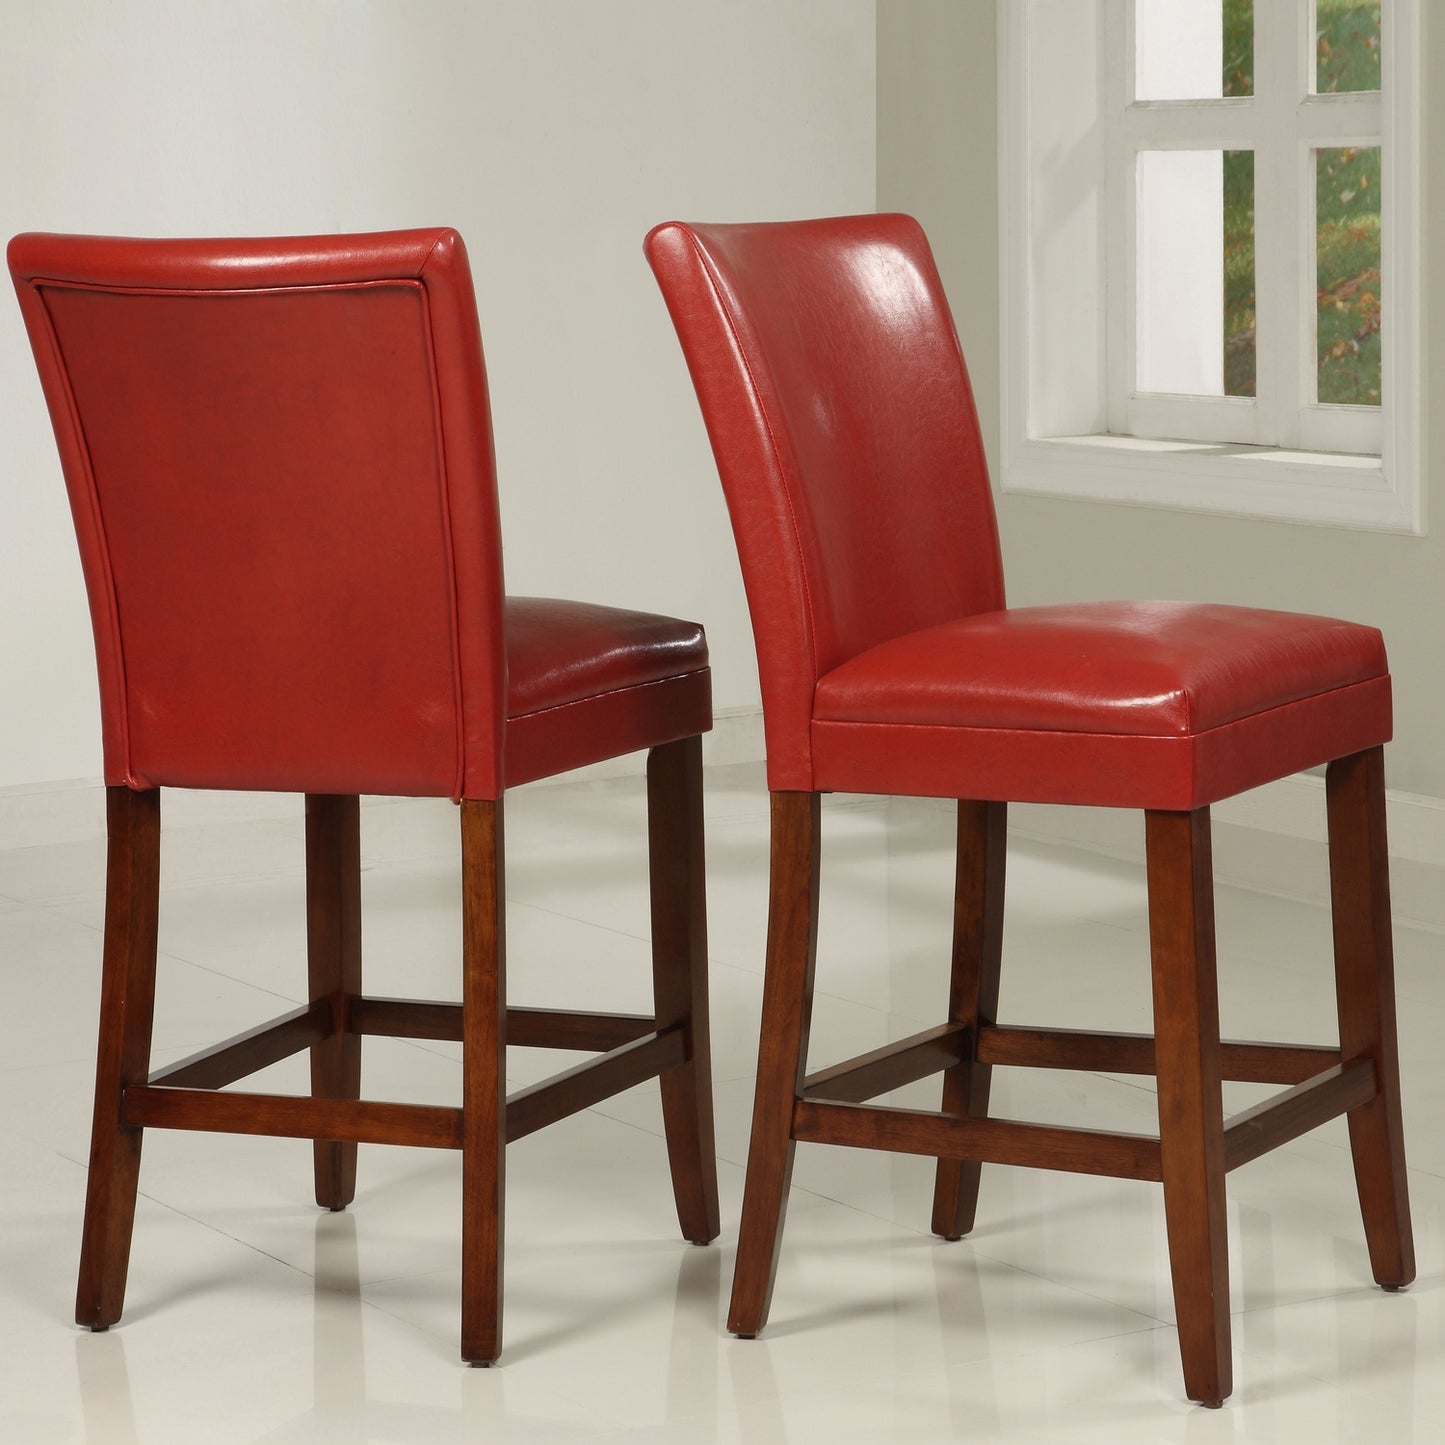 Classic Upholstered High Back Counter Height Chairs (Set of 2) - Red Vinyl